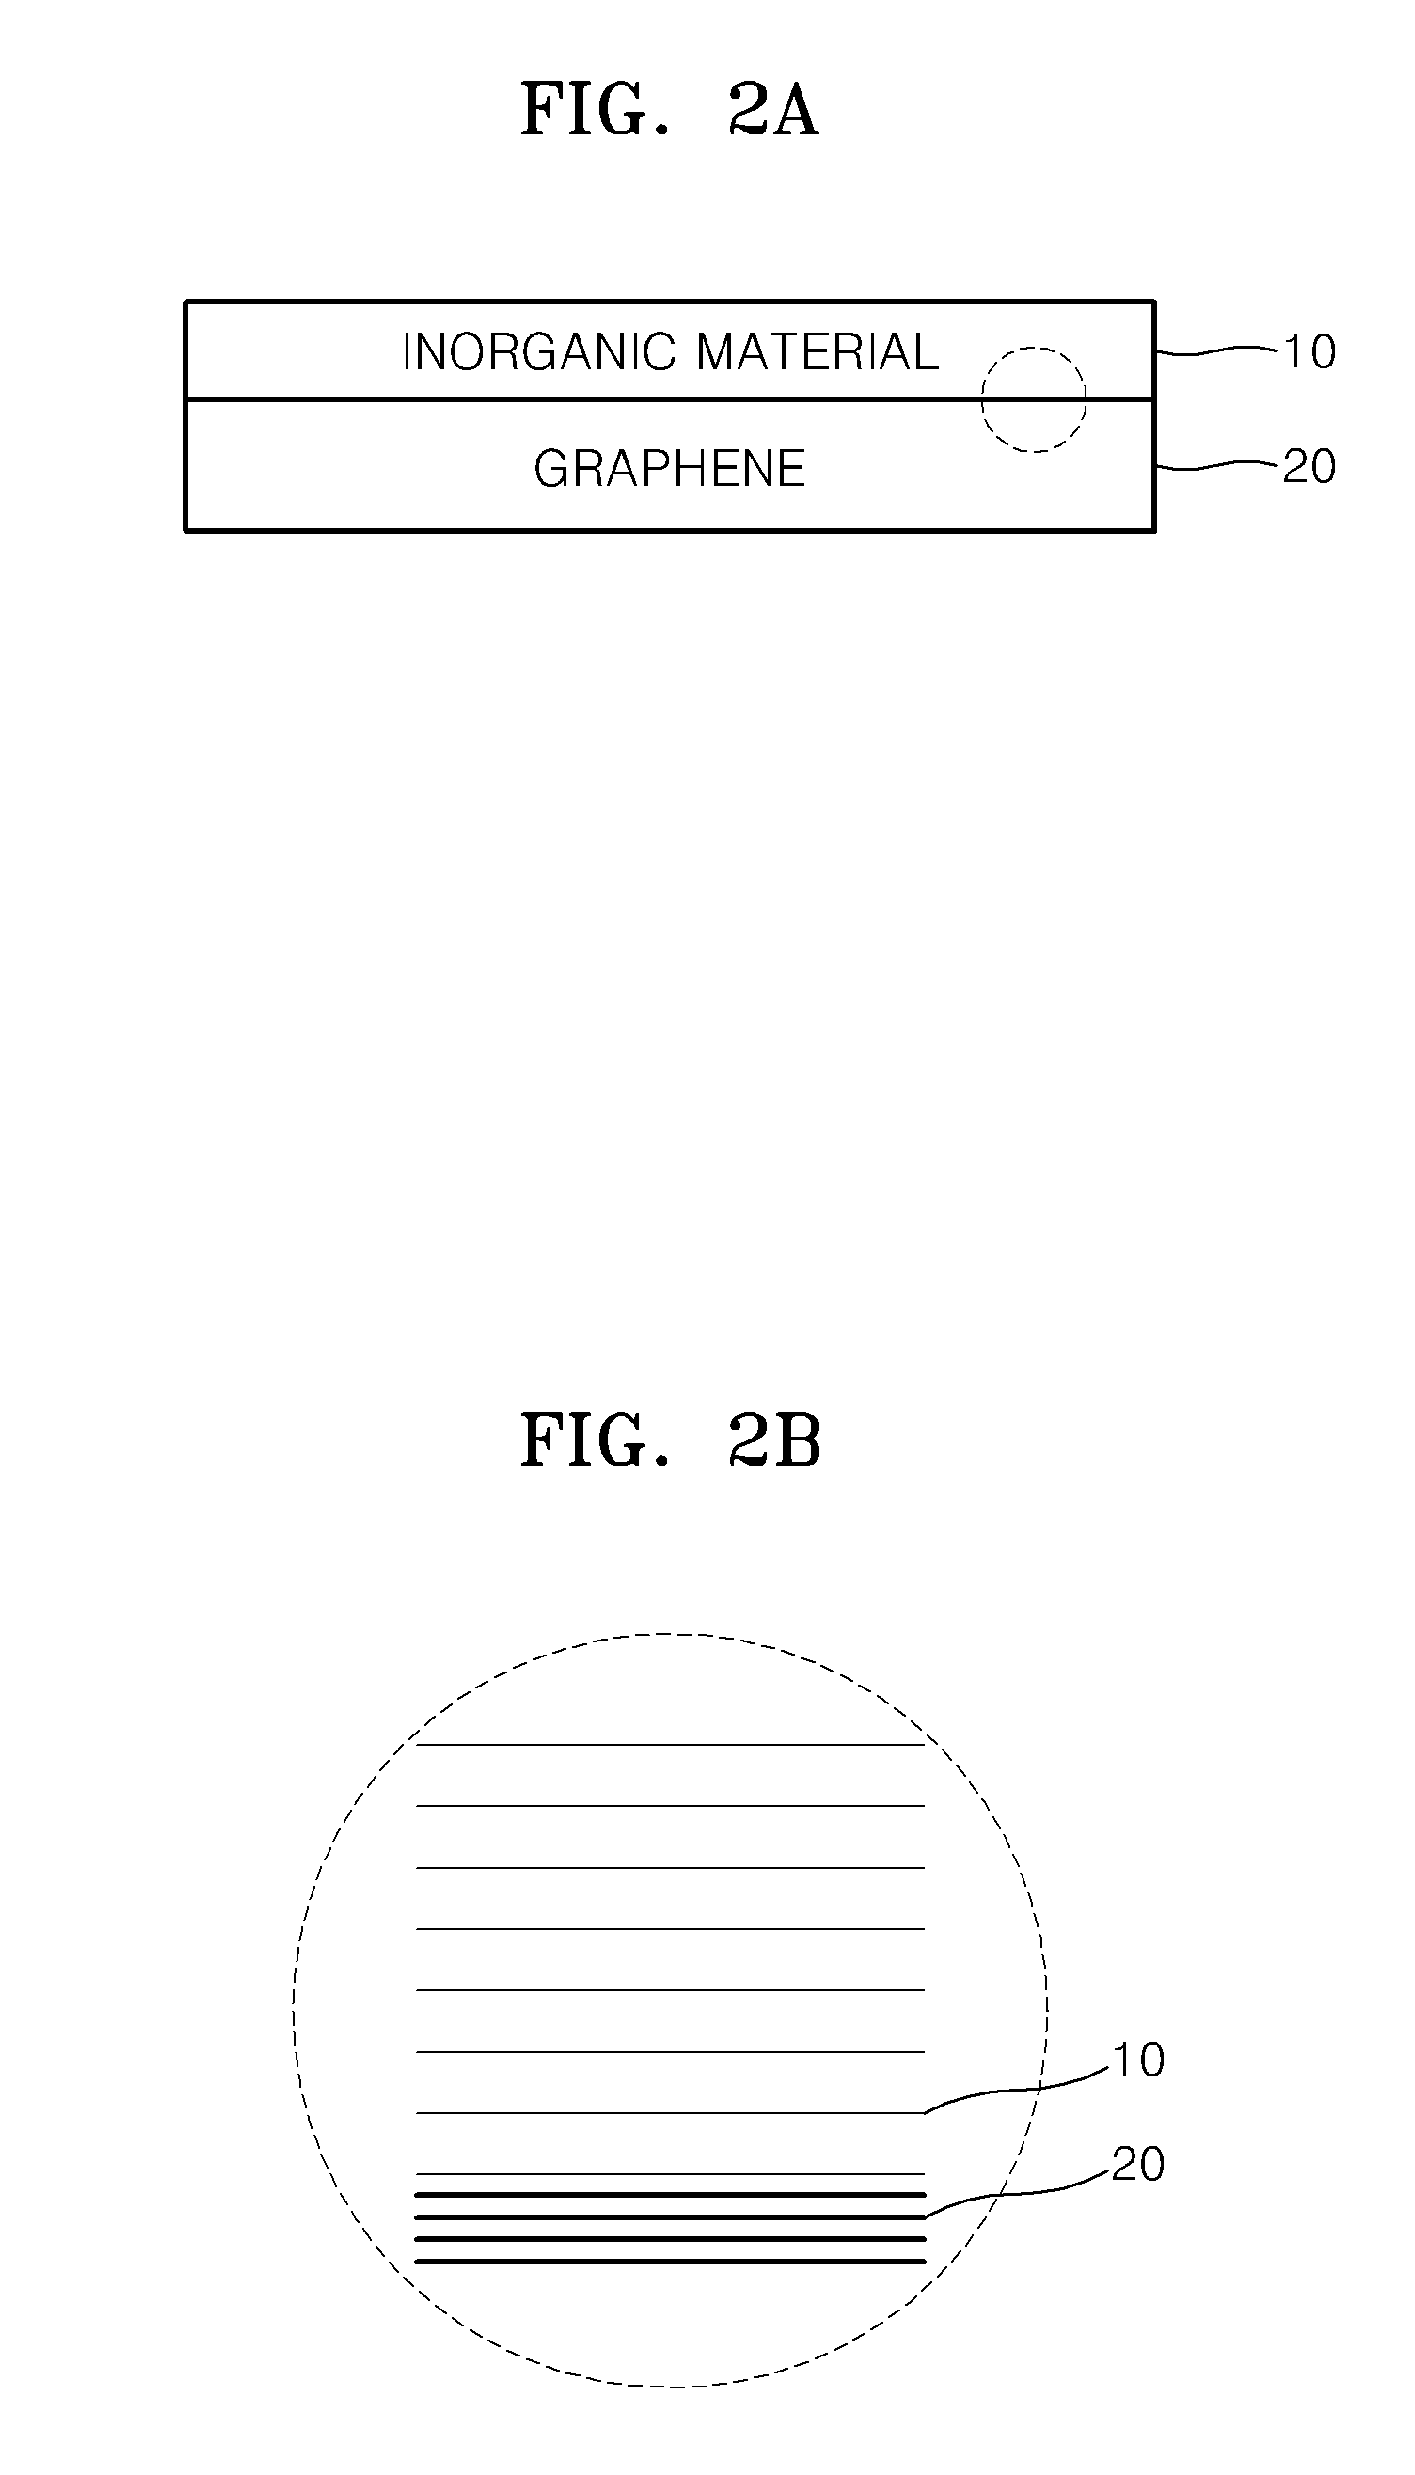 Material including graphene and an inorganic material and method of manufacturing the material